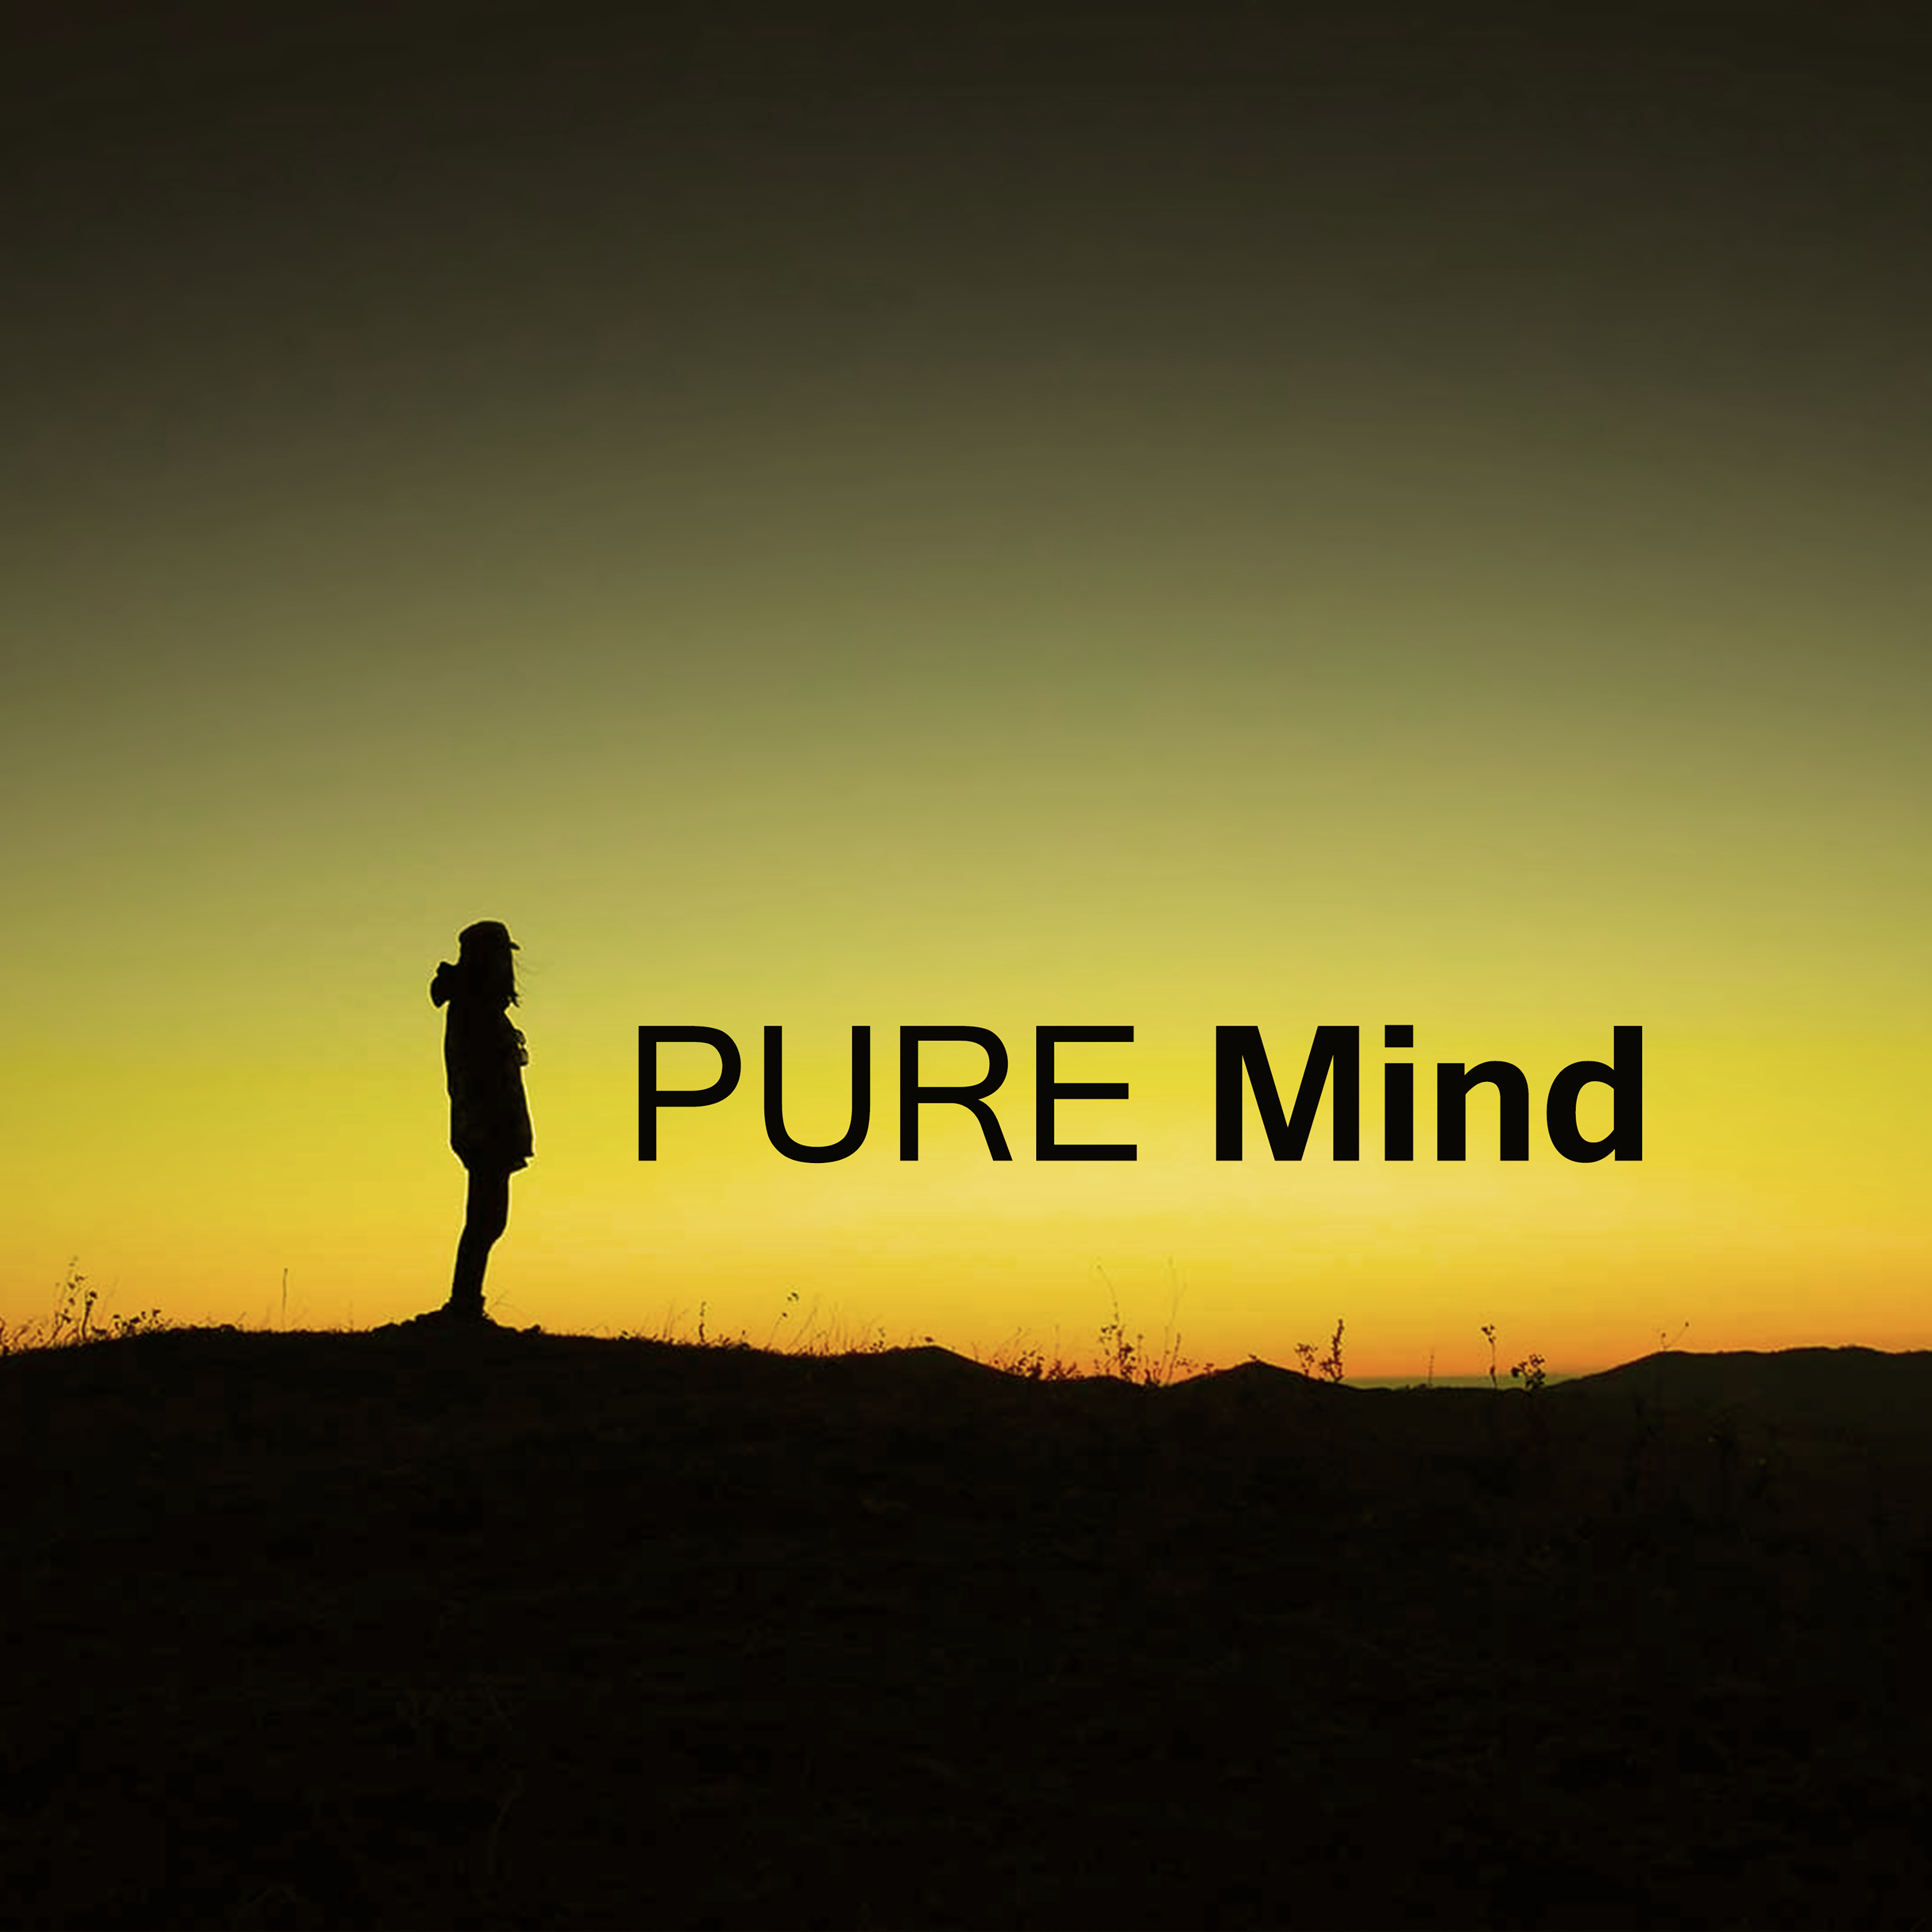 Pure Mind – Soft Music for Relaxation, Stress Relief, Sounds of Water, Best New Age Music 2017, Nature Sounds to Rest